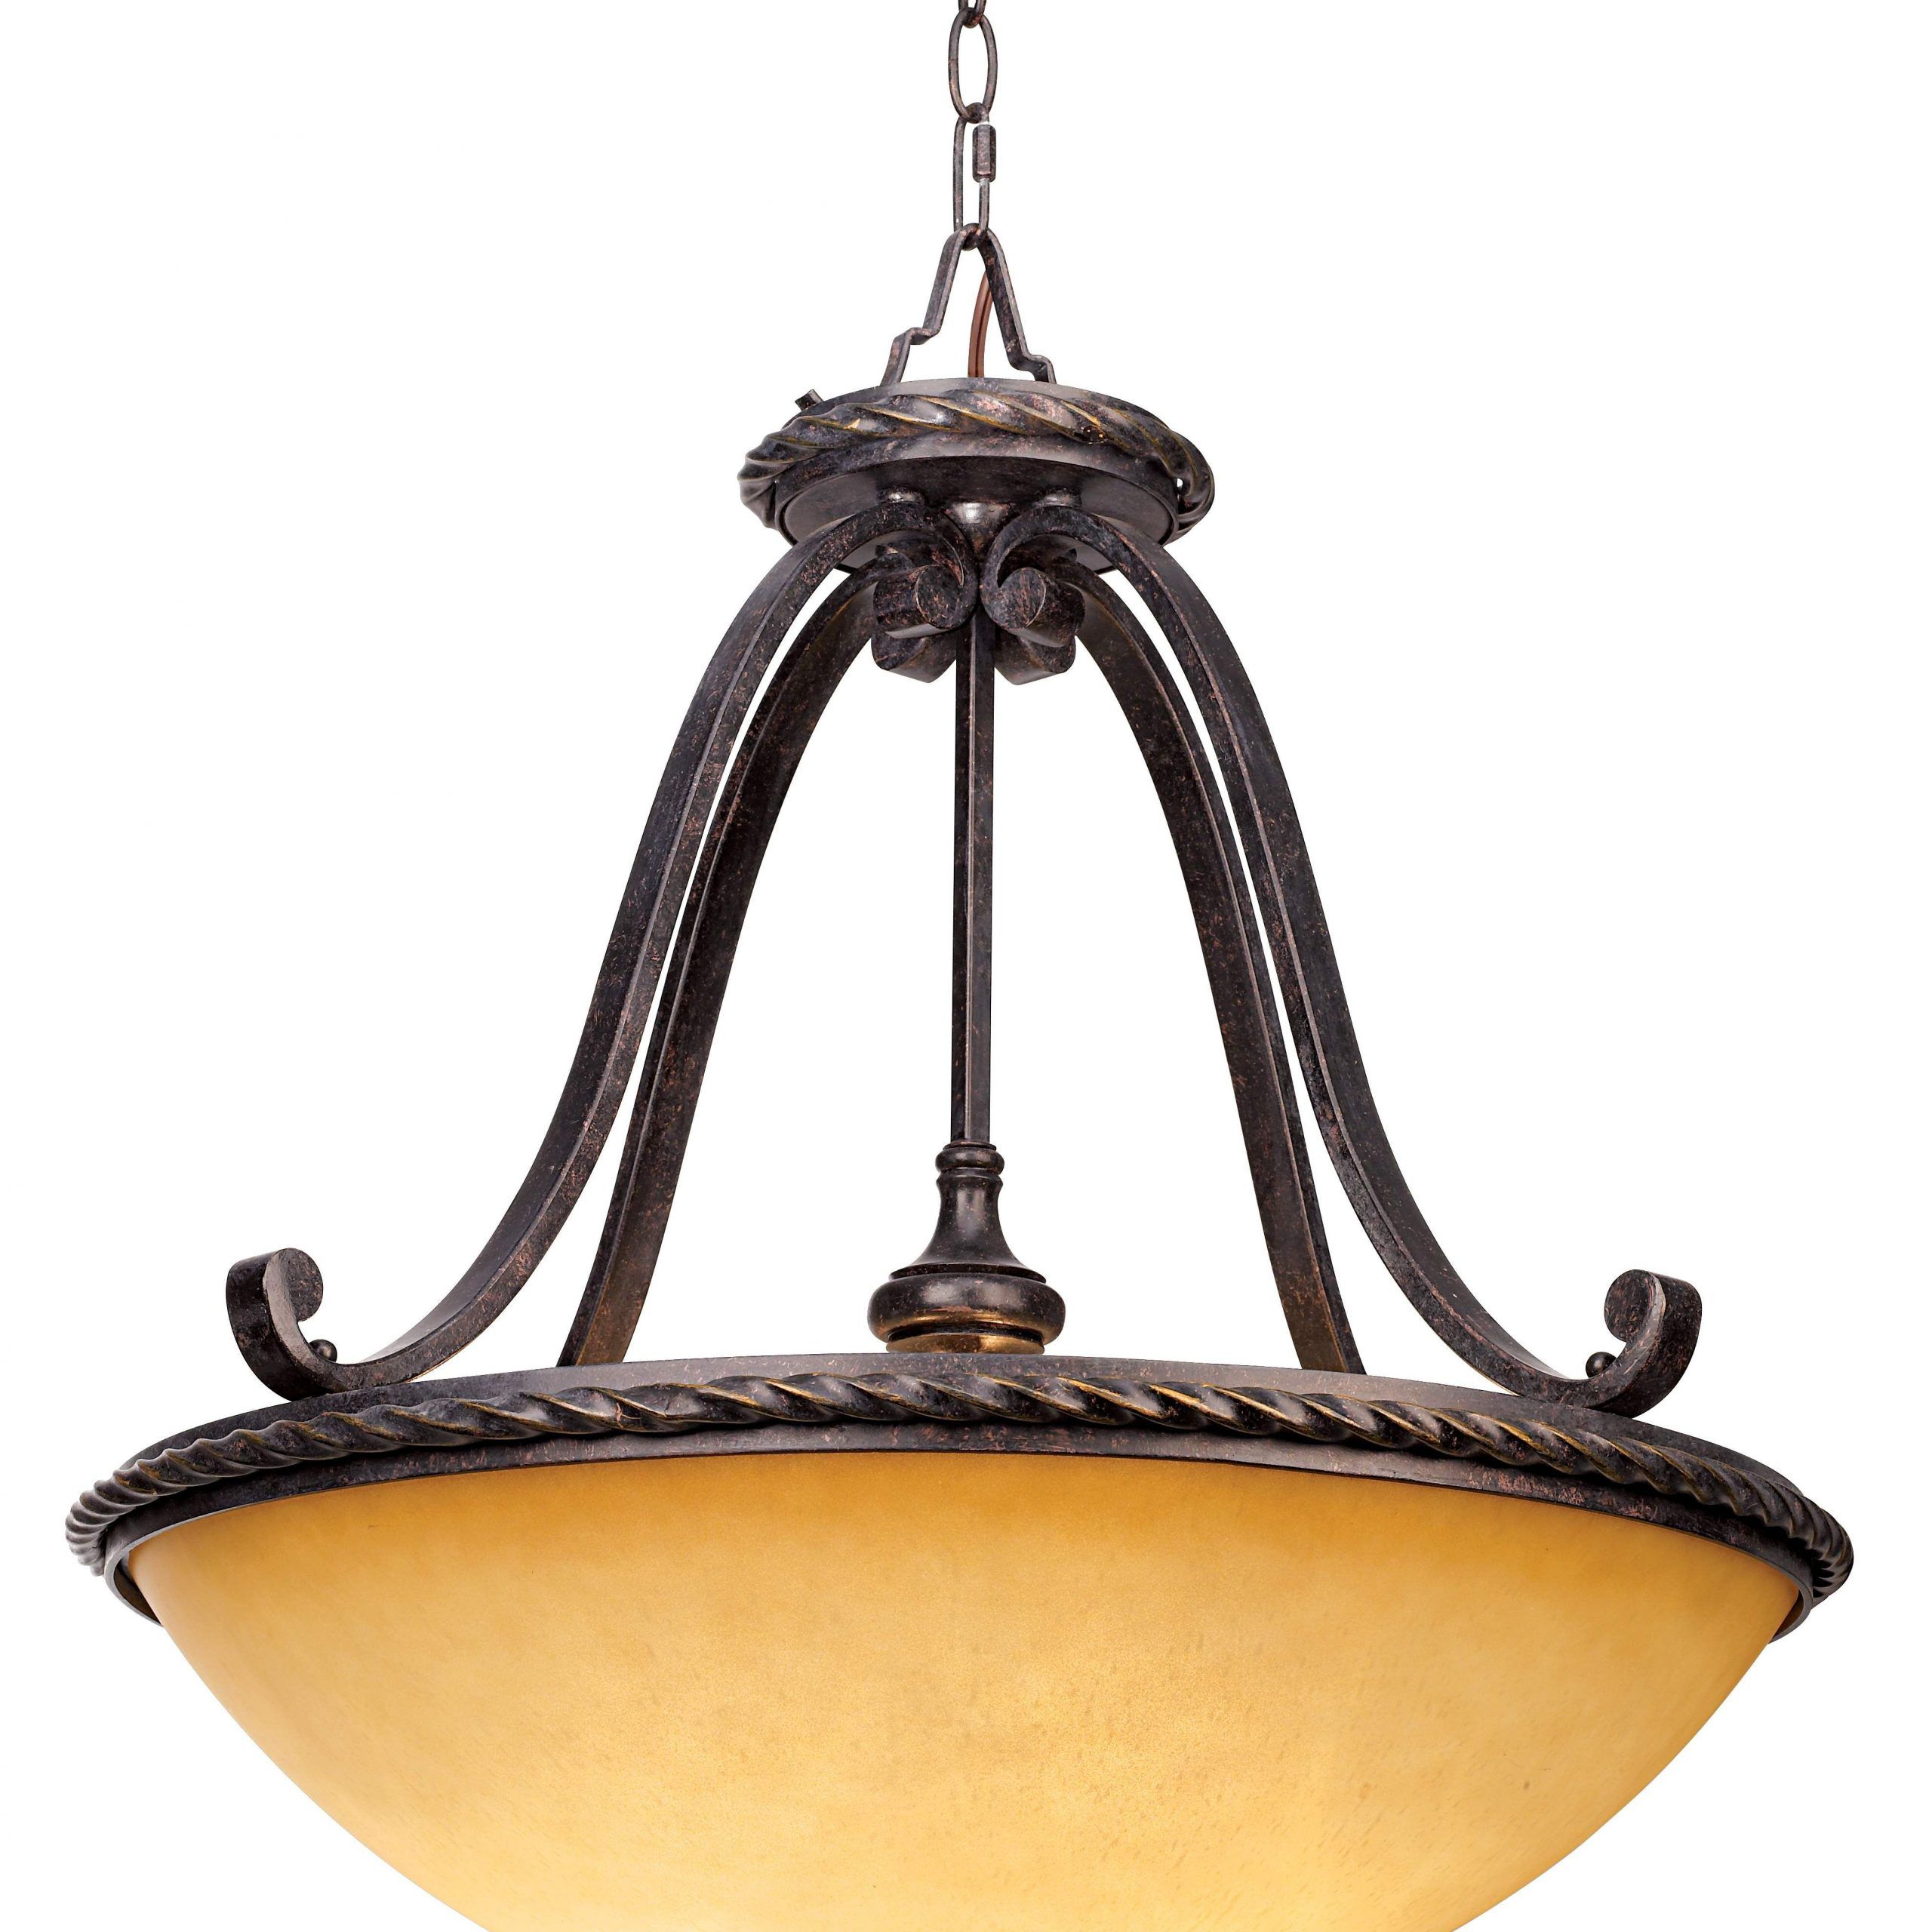 Amber Scavo Glass 22" Wide 3 Light Bowl Pendant Light With Regard To Bronze With Clear Glass Pendant Lights (View 7 of 15)